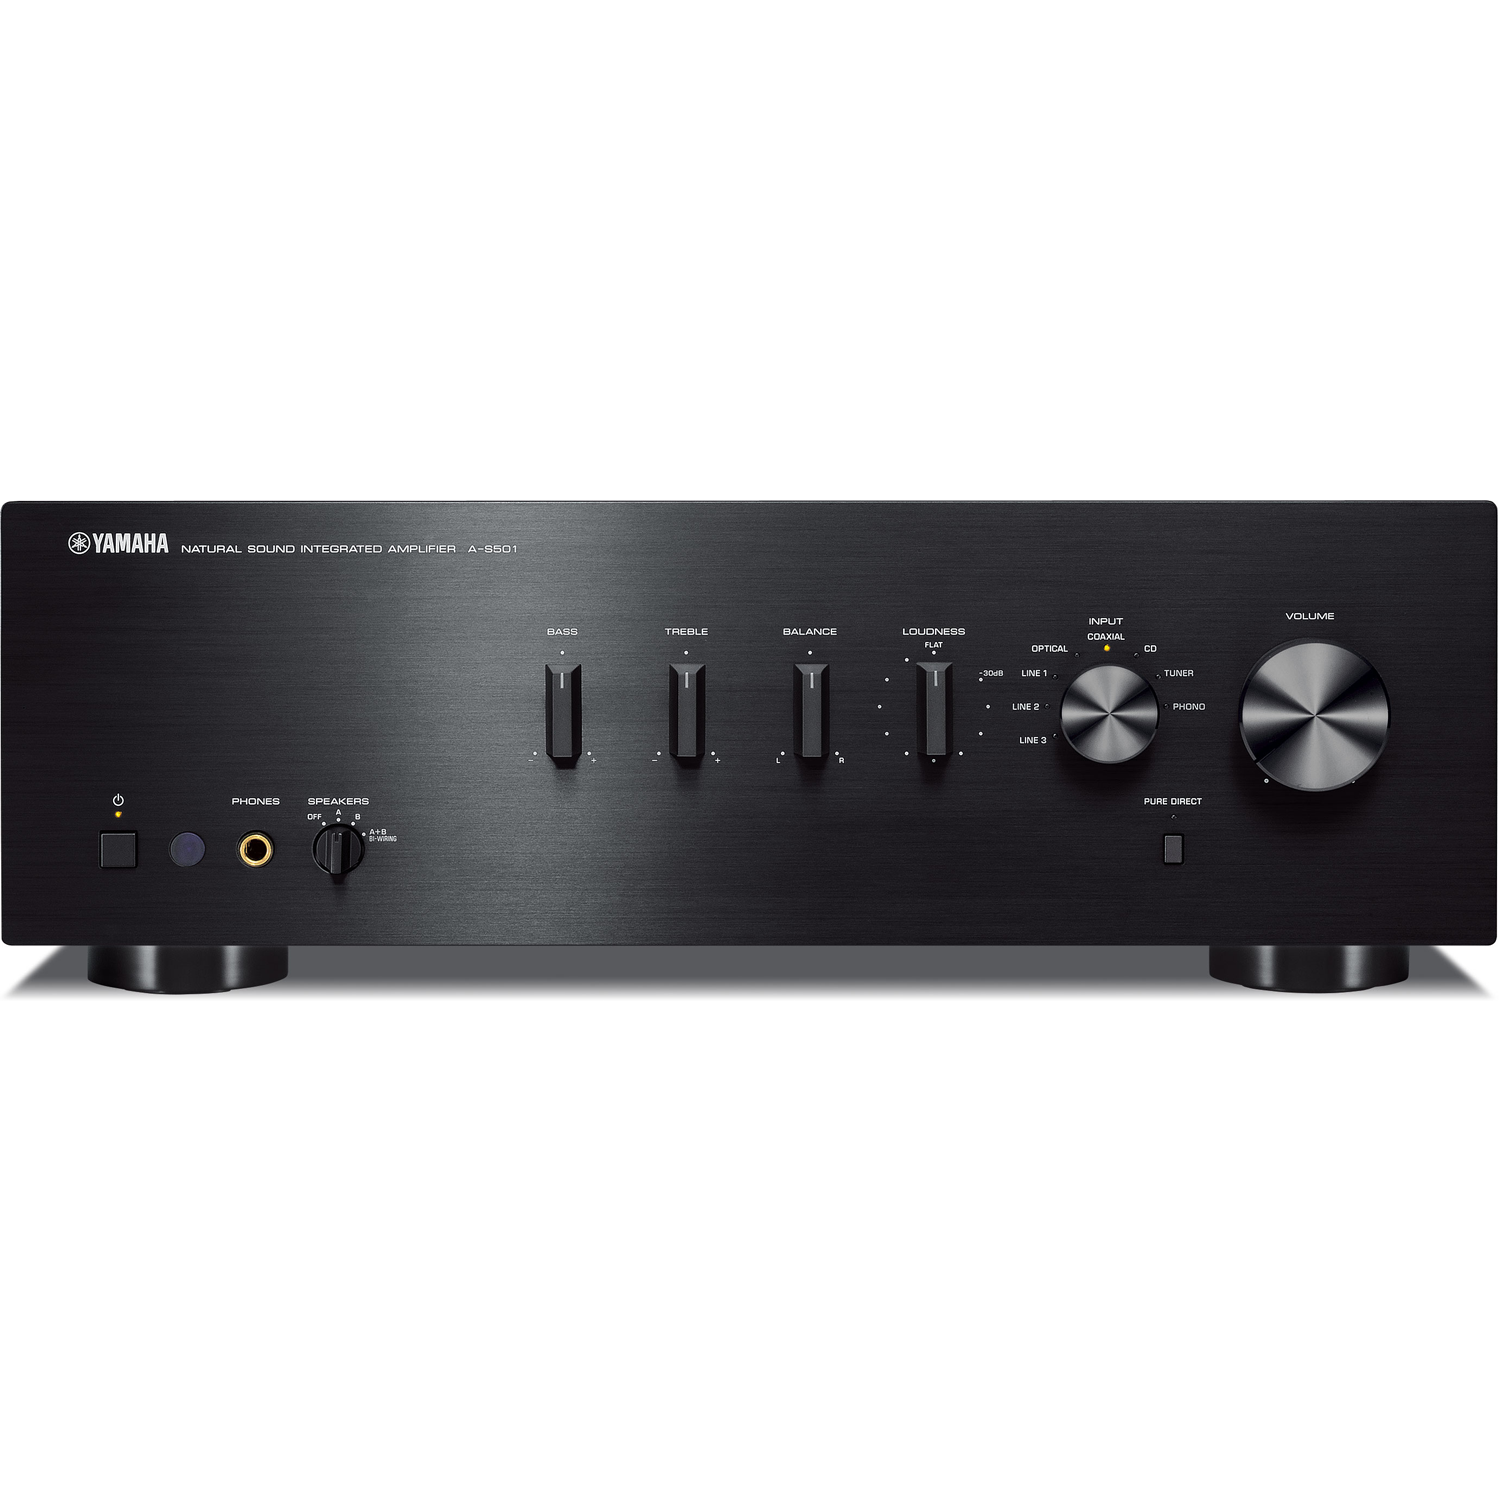 YAMAHA A-S501 2-Ch x 85 Watts Integrated Amplifier w/ Built-in DAC Black